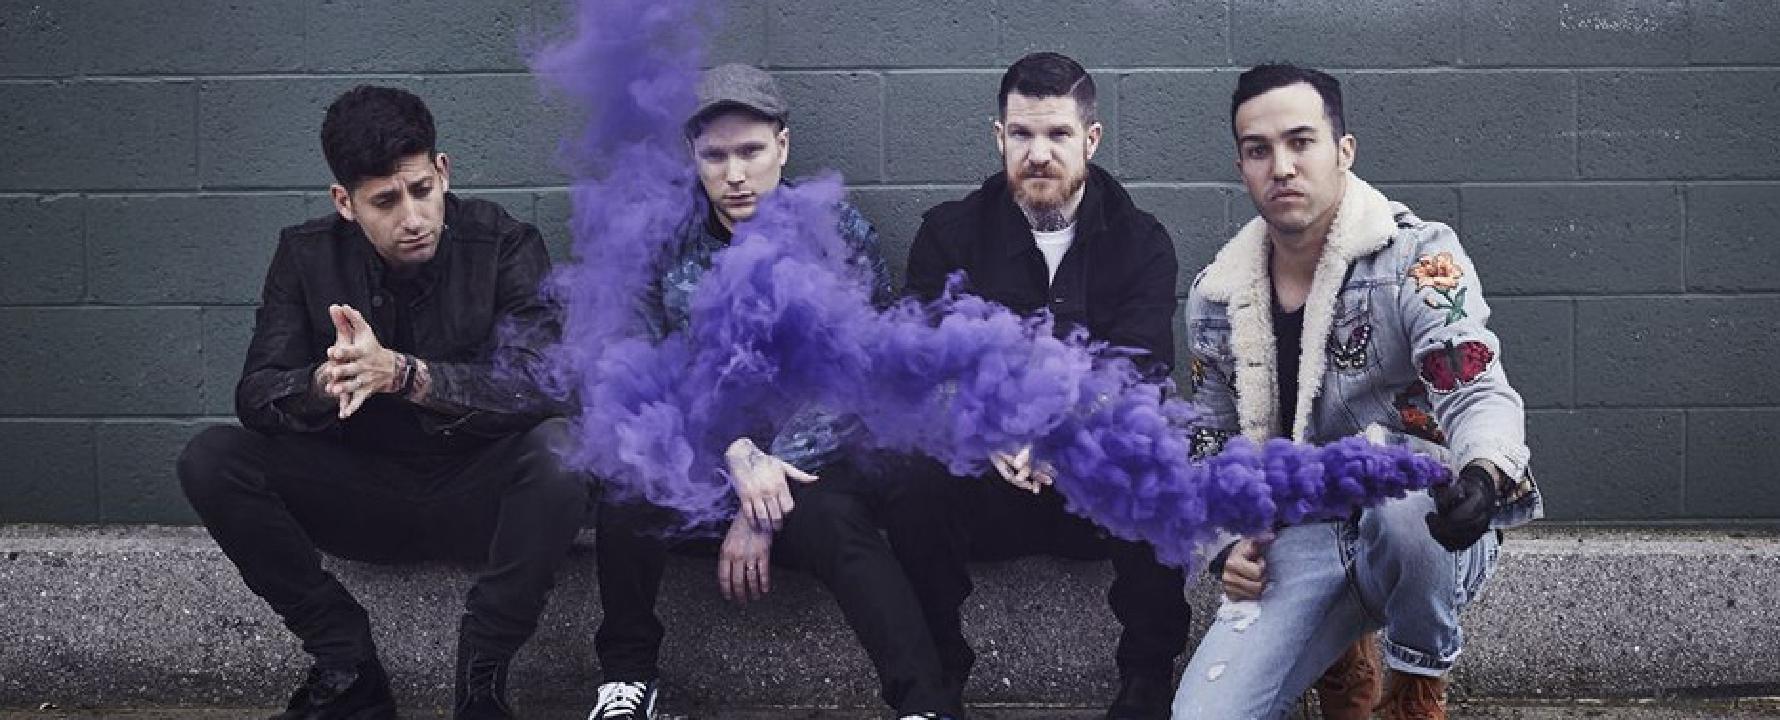 Promotional photograph of Fall Out Boy.